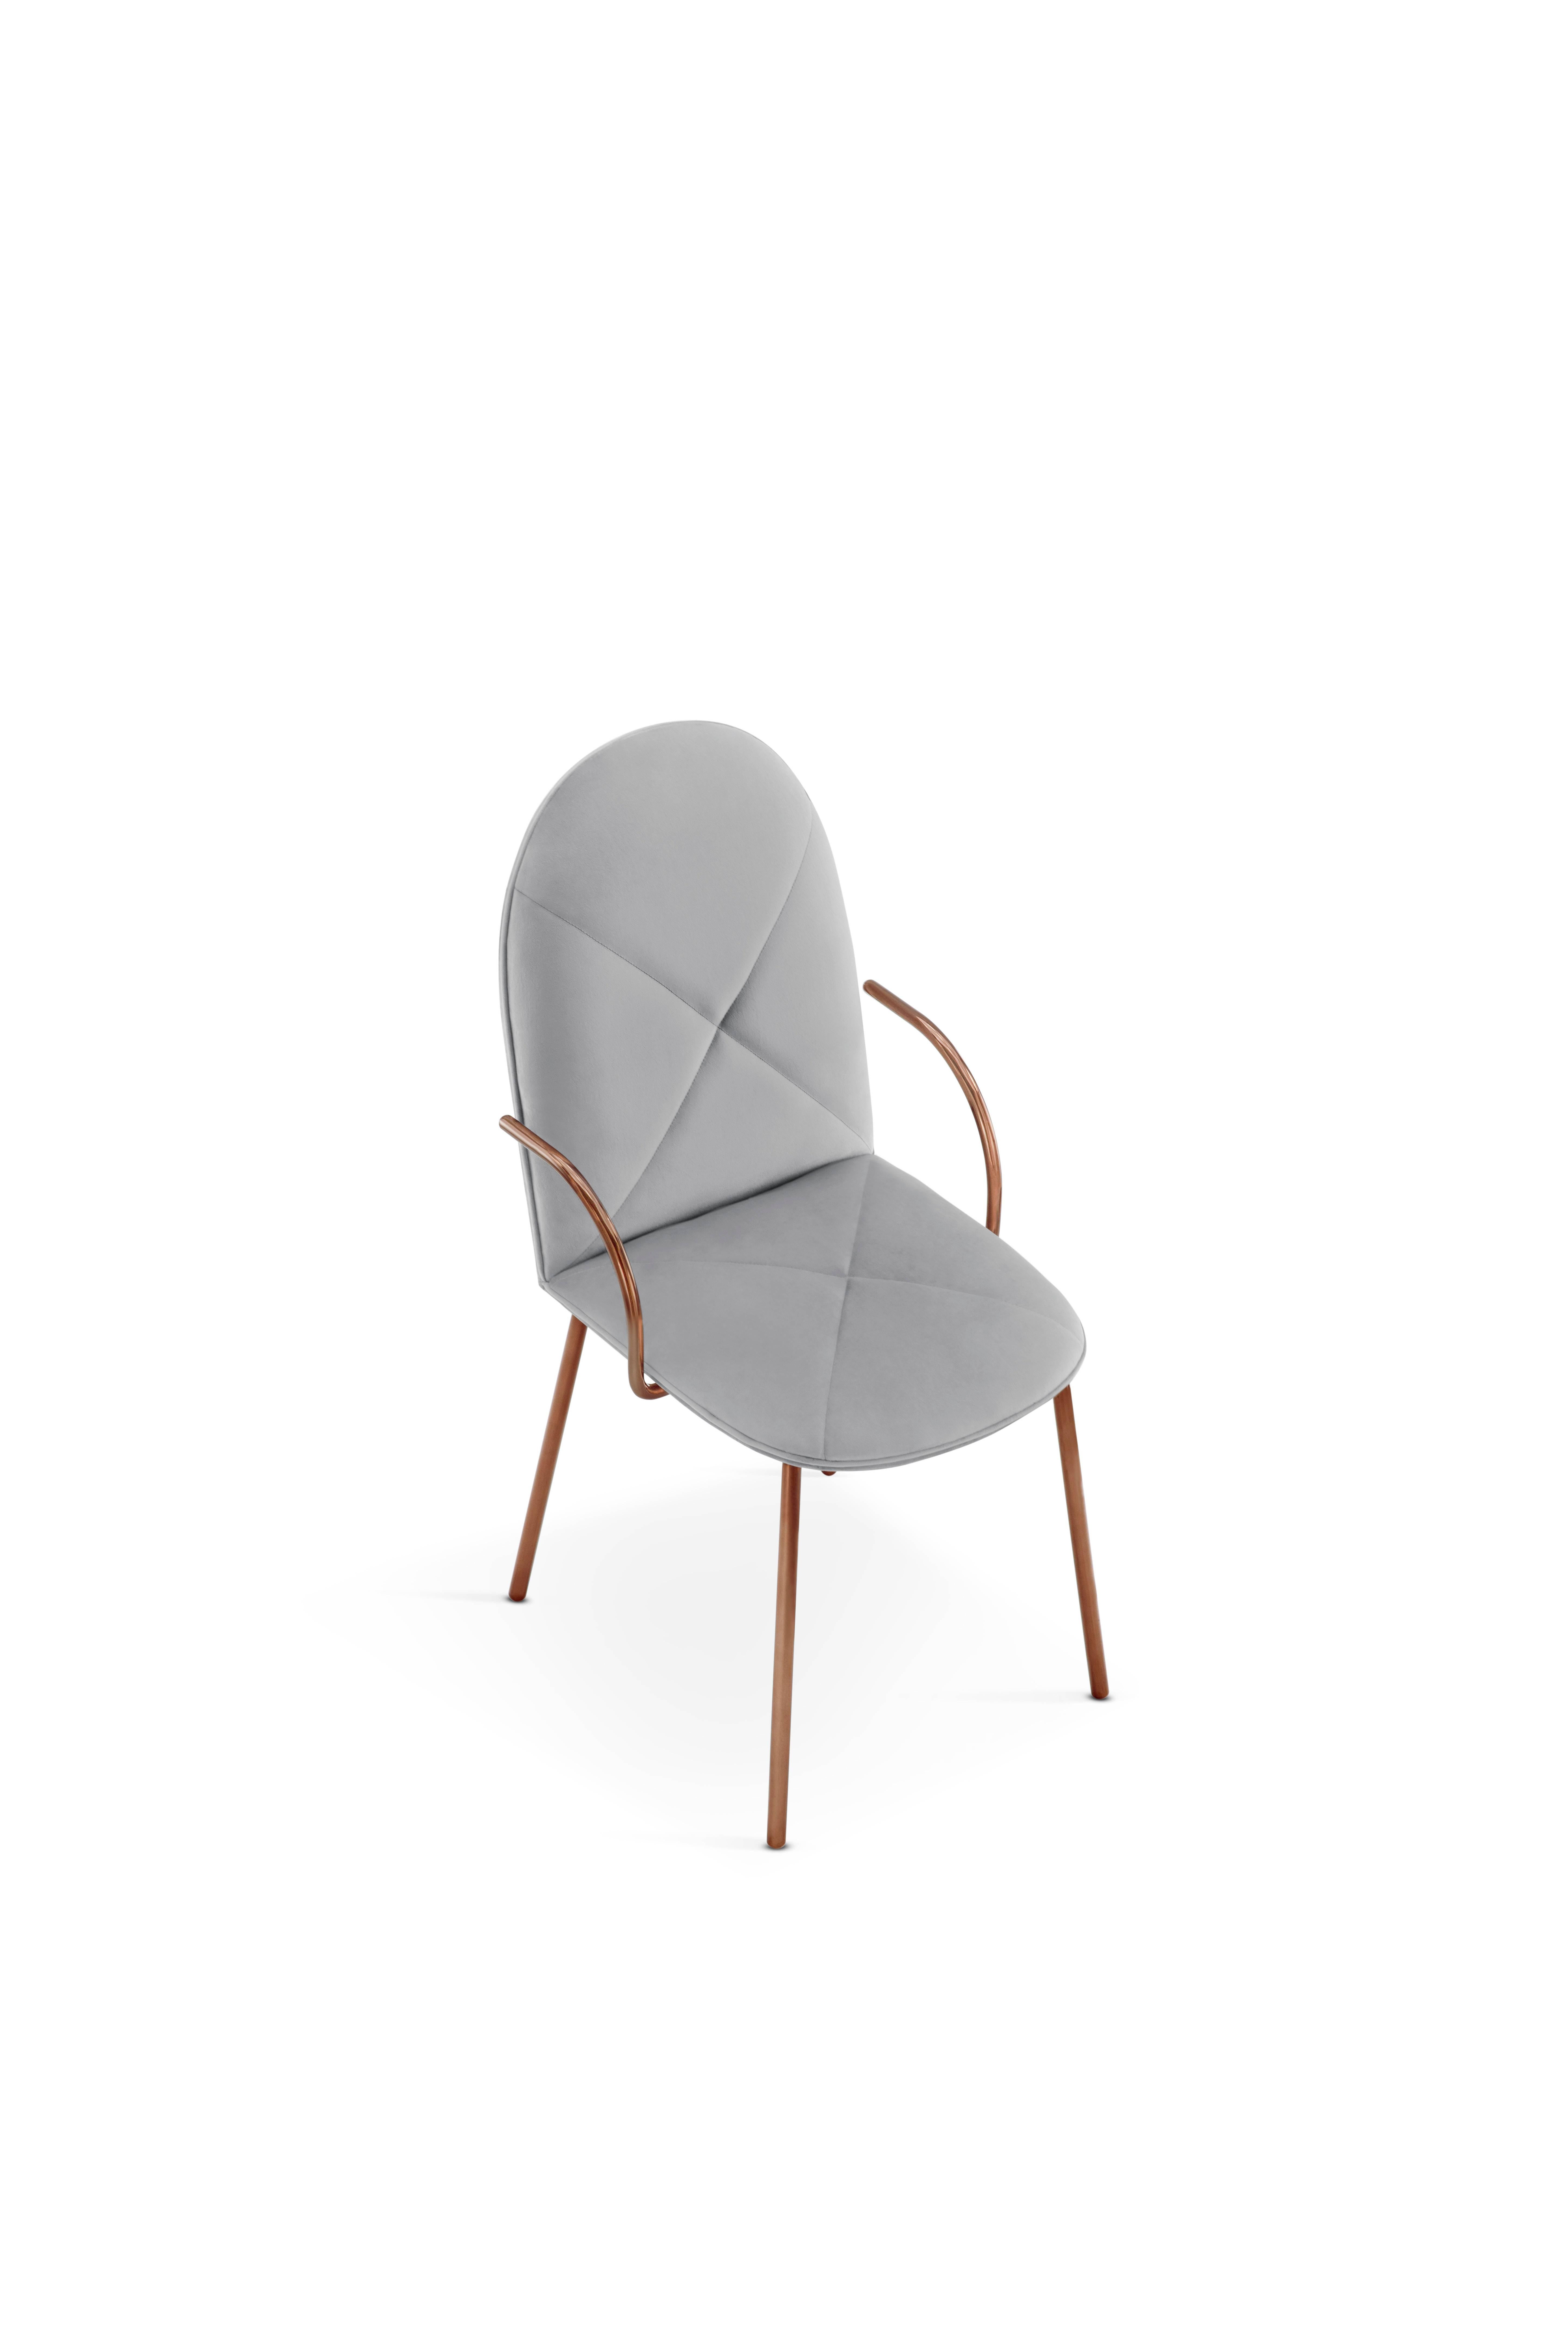 Gold Orion Chair Grey by Nika Zupanc for Scarlet Splendour For Sale